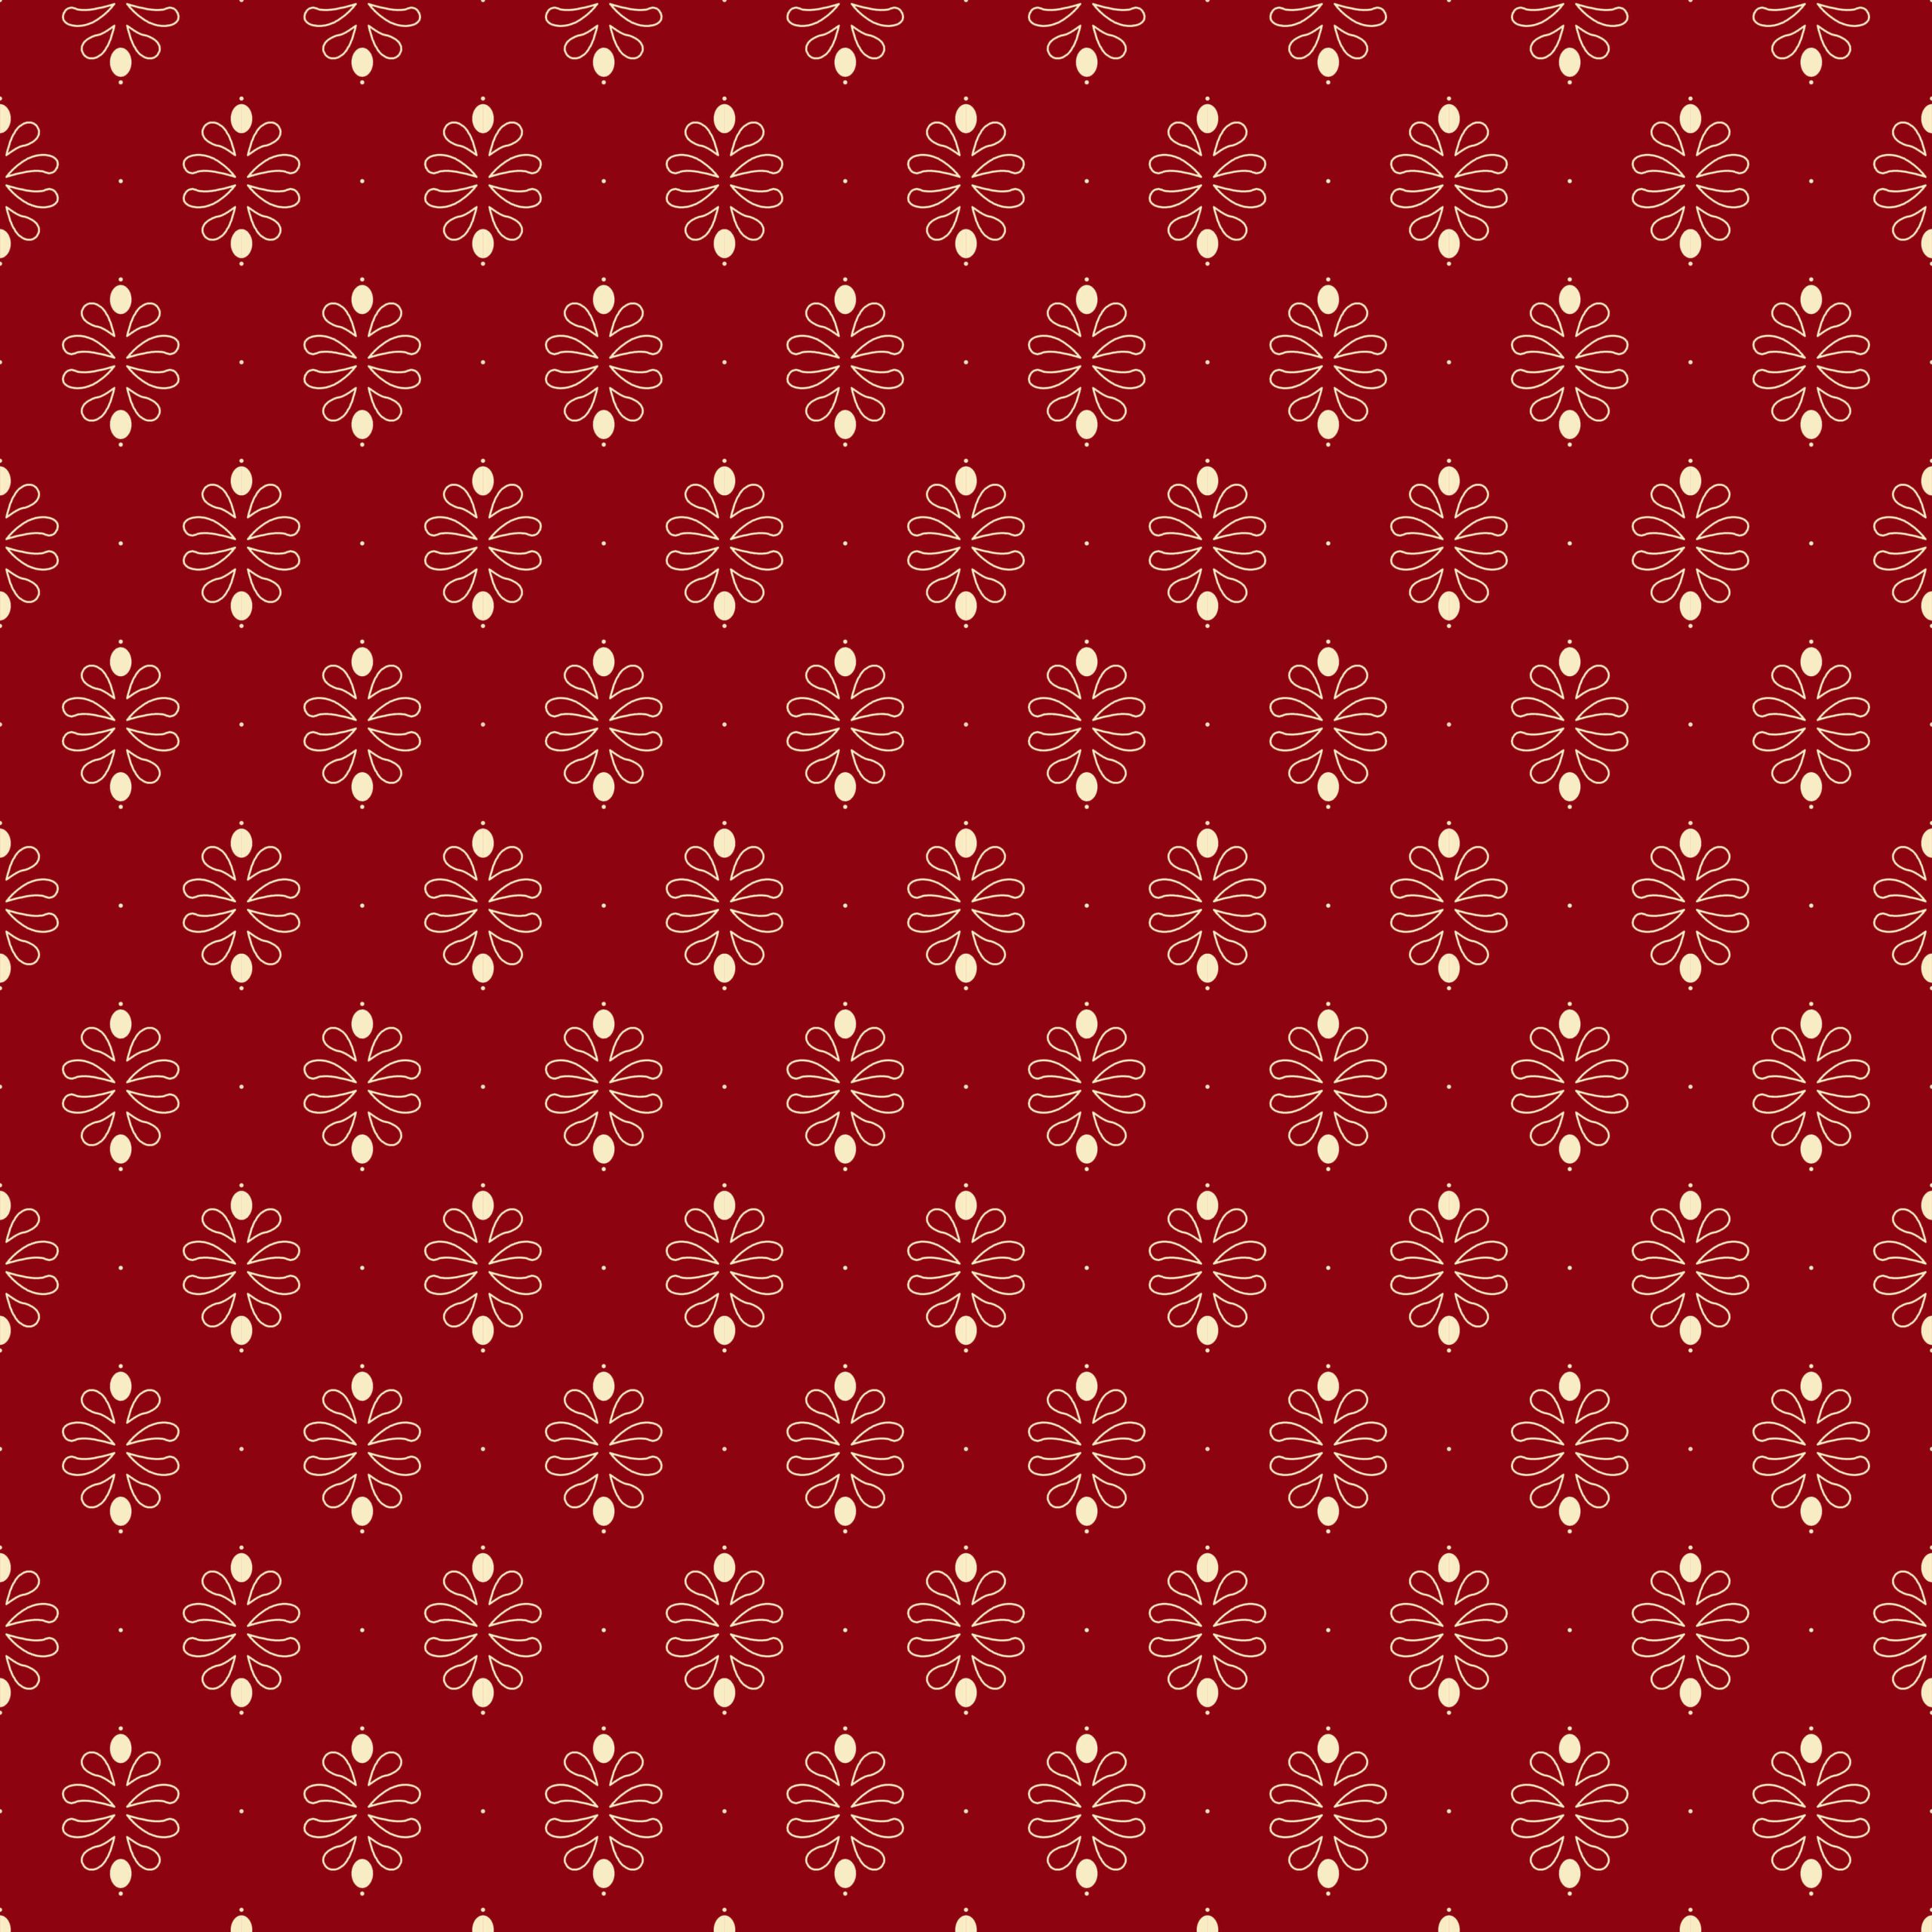 Damask Ruby Red